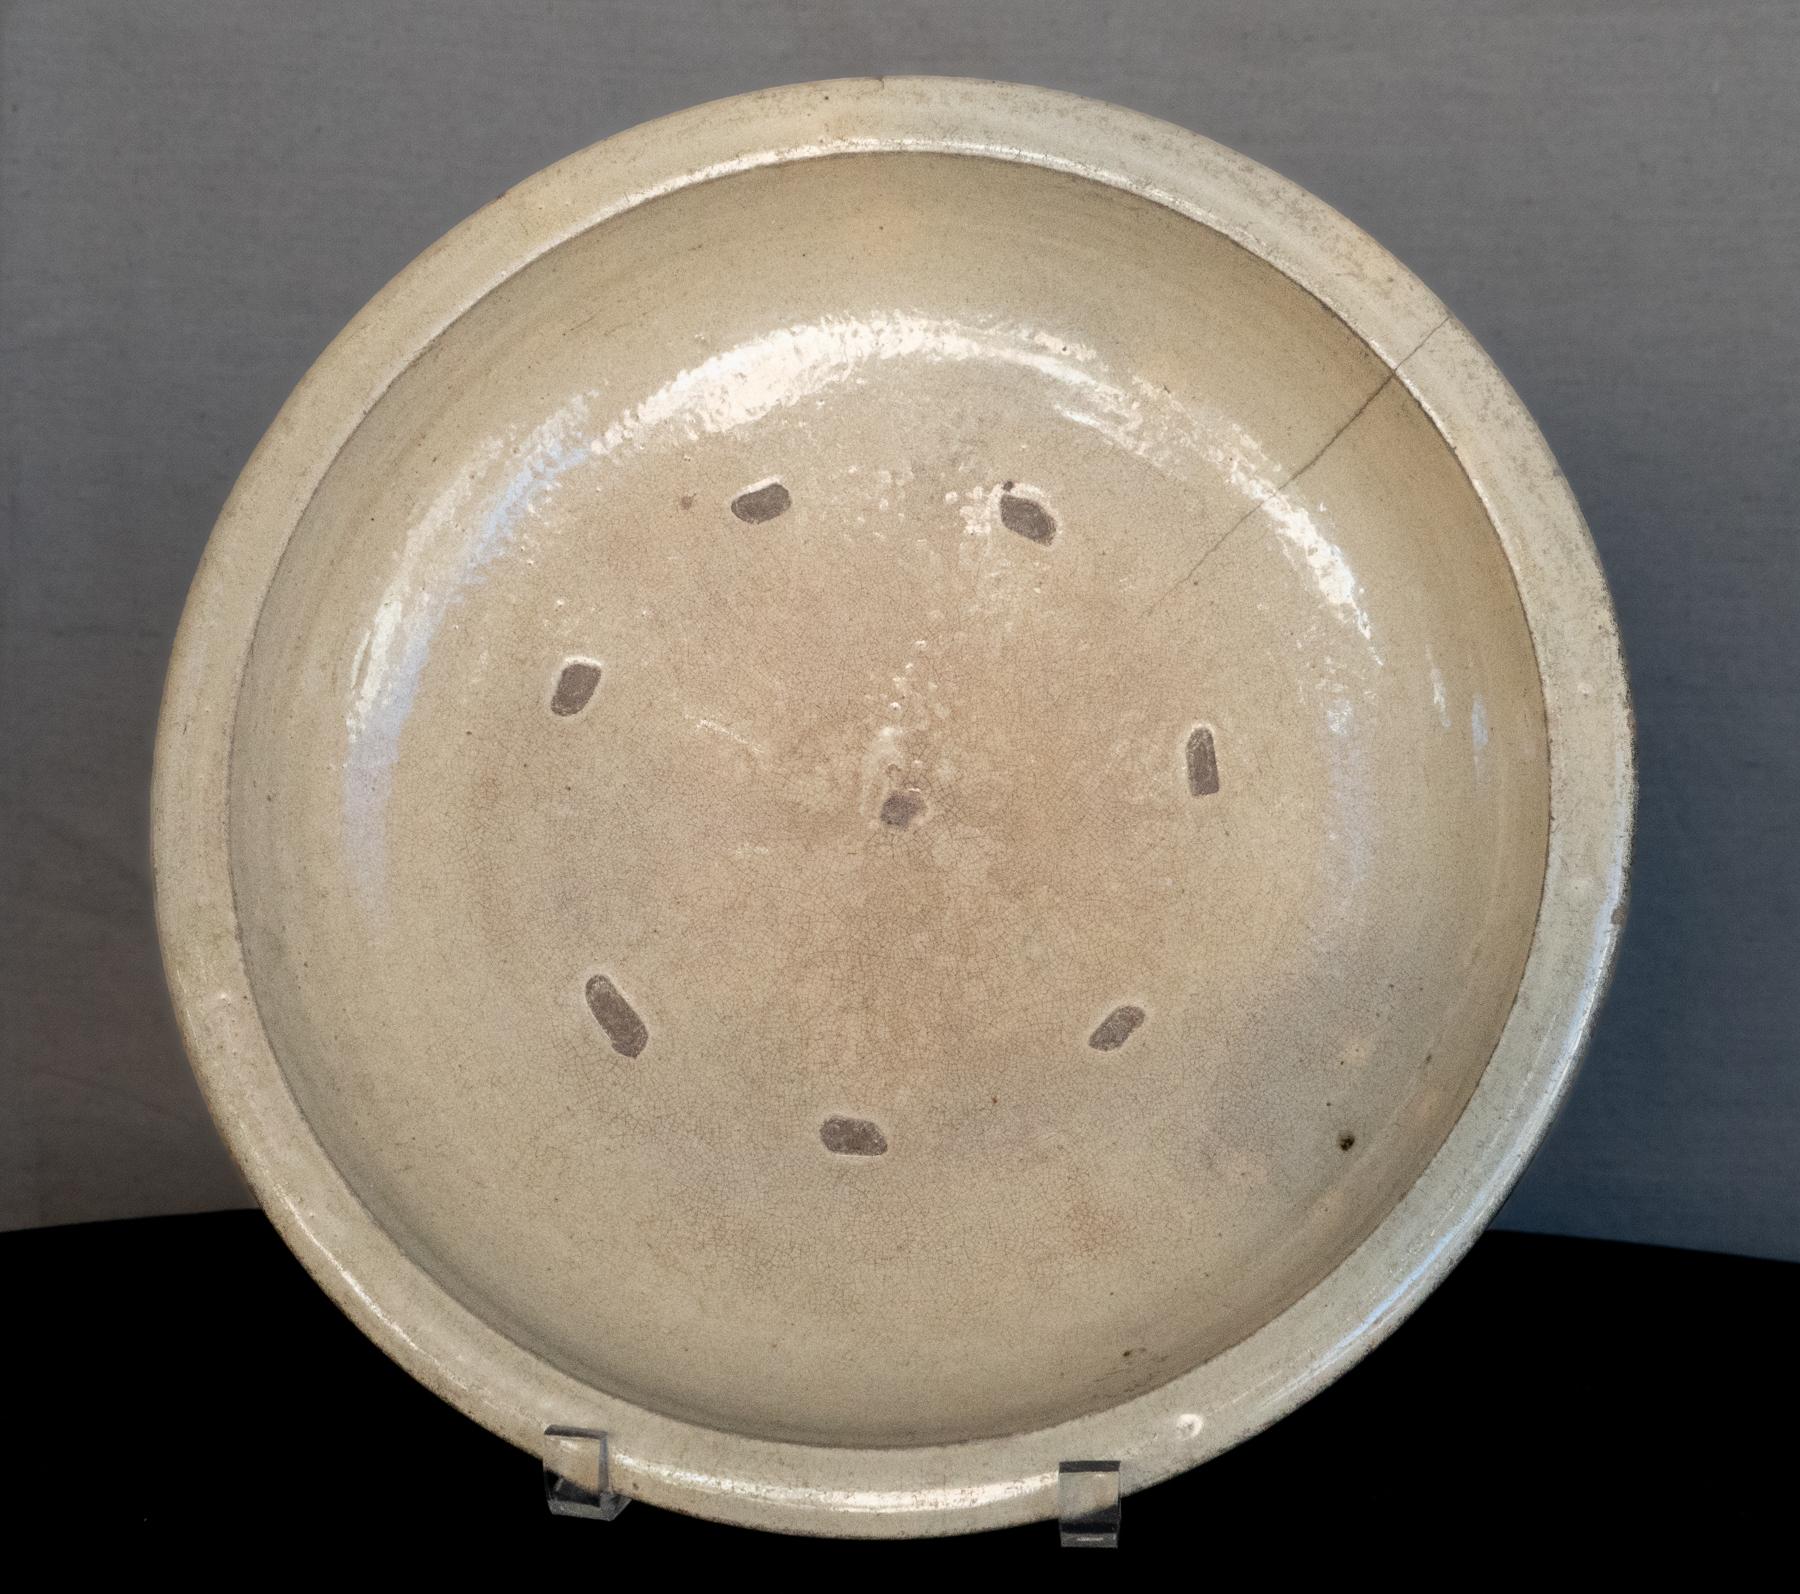 Late 18th century Japanese Celadon charger with good patina.
Good wear to the center of the plate and very fine crackle create a multi-layered hues to the glaze. Spur marks to the front of the plate in a radial pattern and an age crack. The ceramic